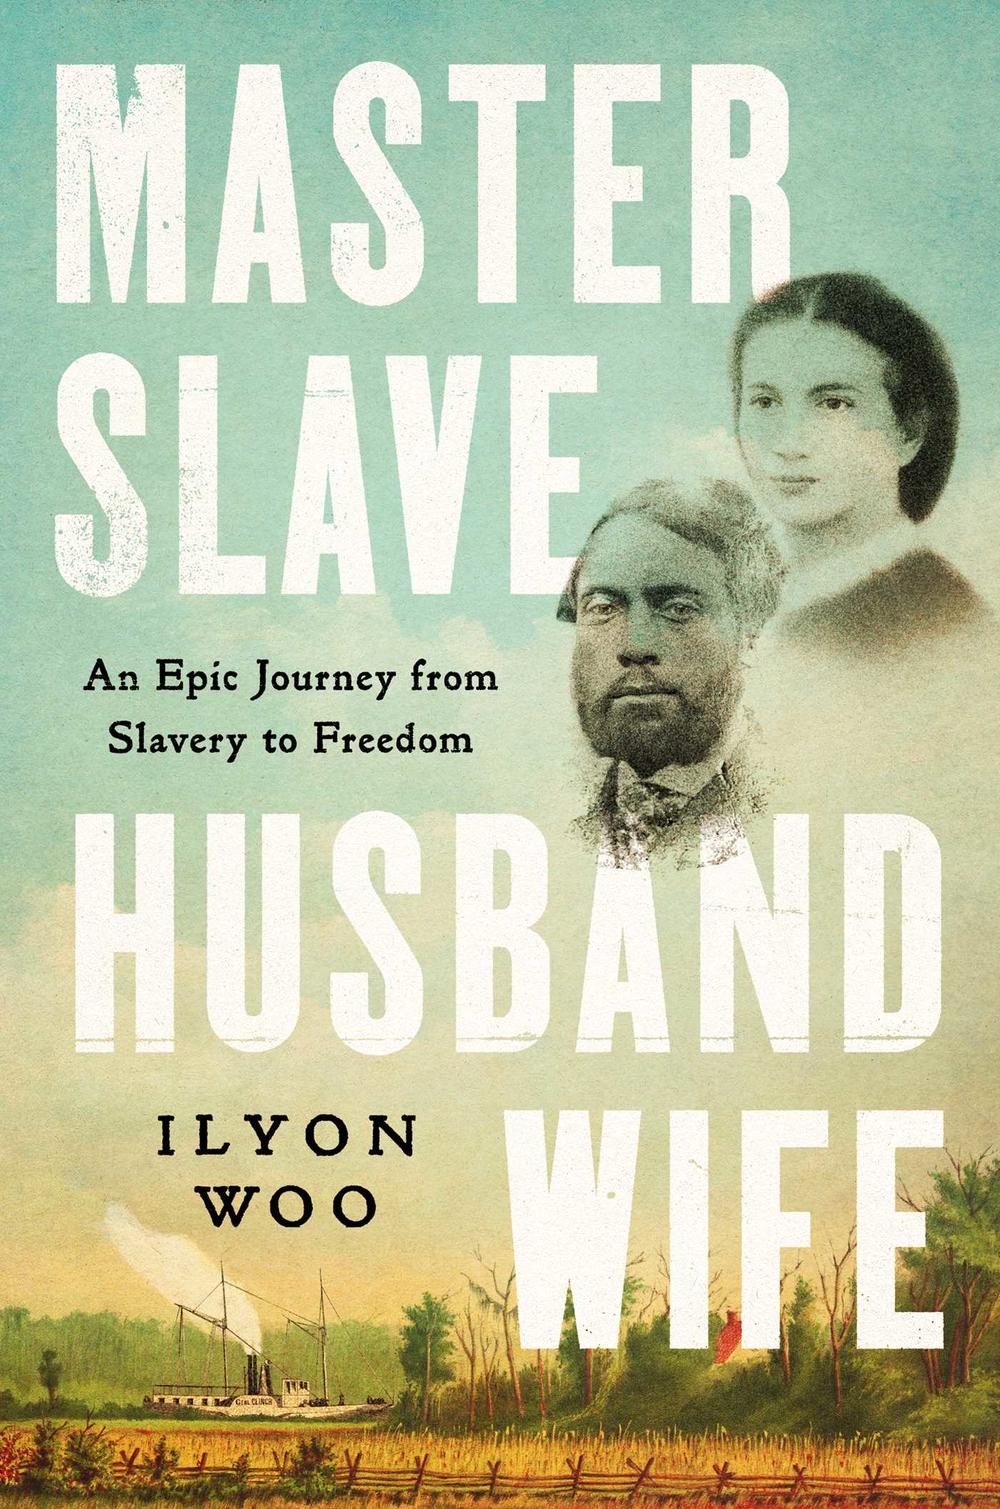 The cover of the book, "Master Slave Husband Wife," is shown featuring to headshots and a pastoral 19th Century Southern scene.